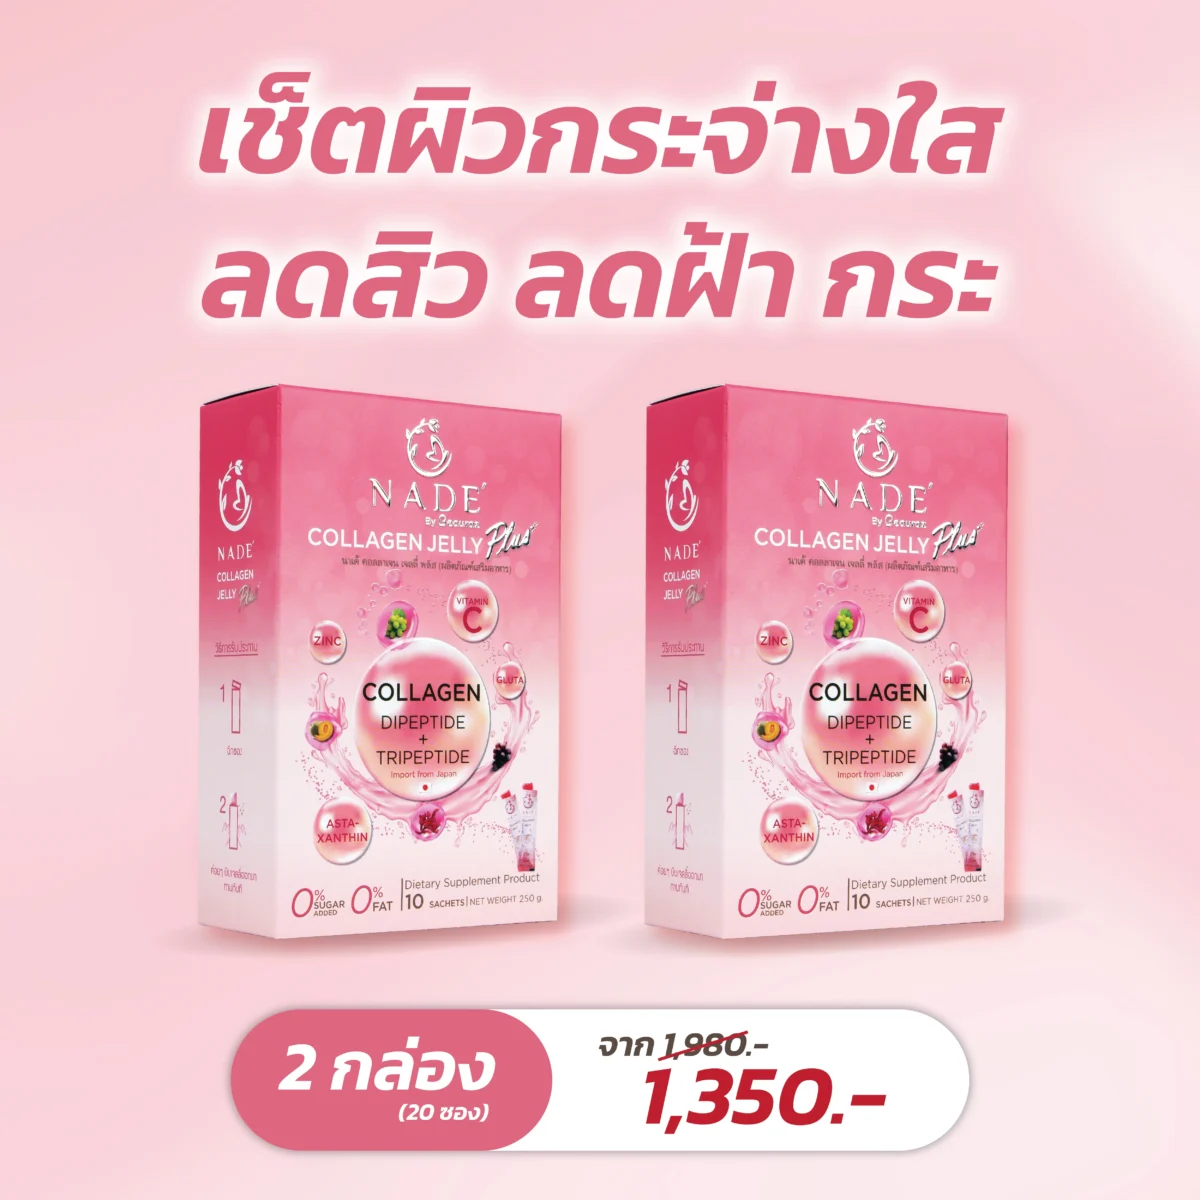 NADE' Collagen Jelly Plus